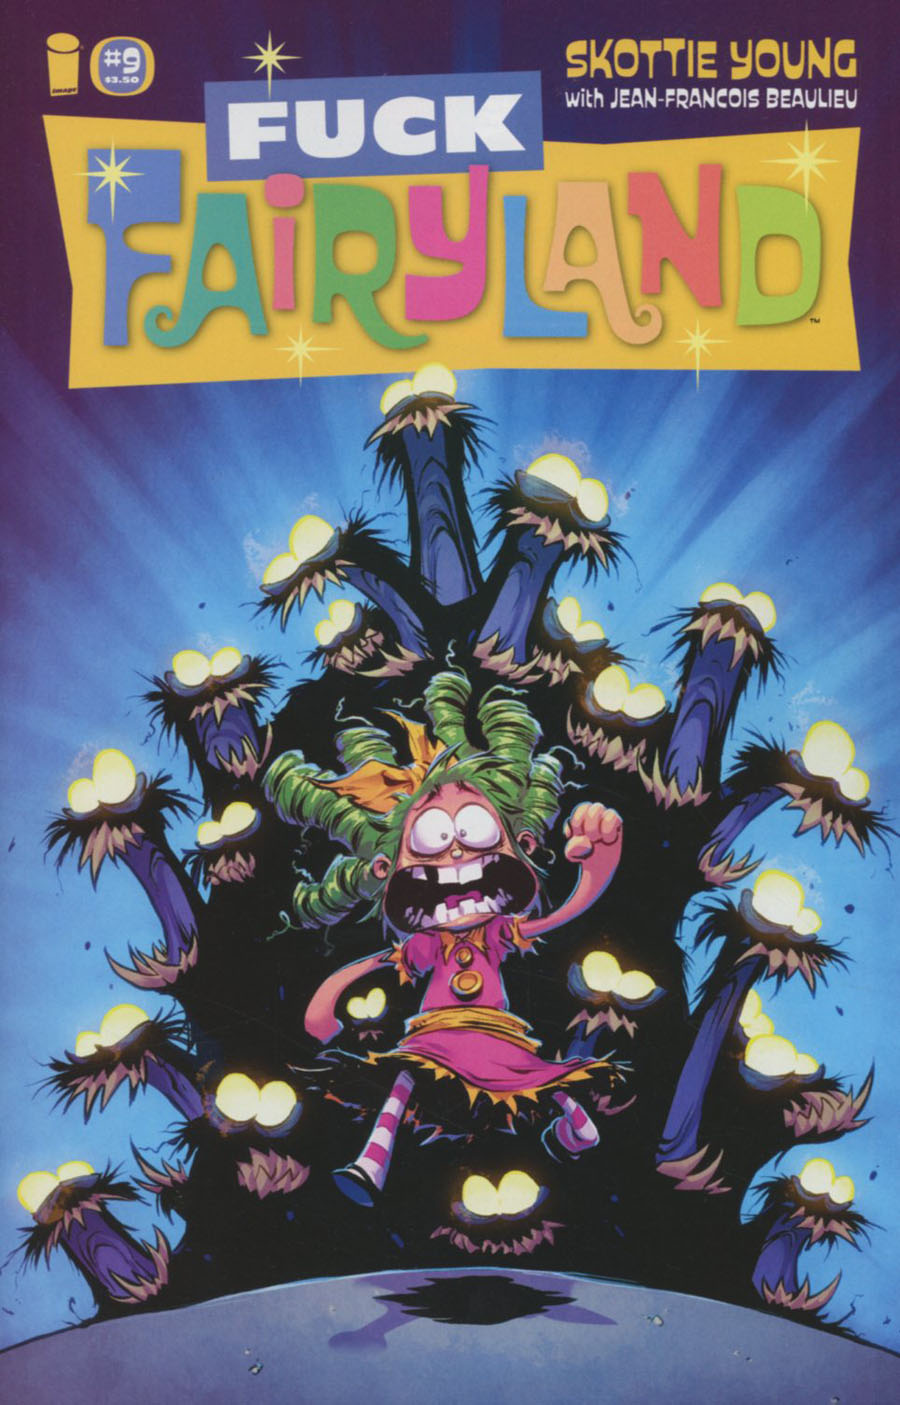 I Hate Fairyland #9 Cover B Variant Skottie Young F*ck Fairyland Cover